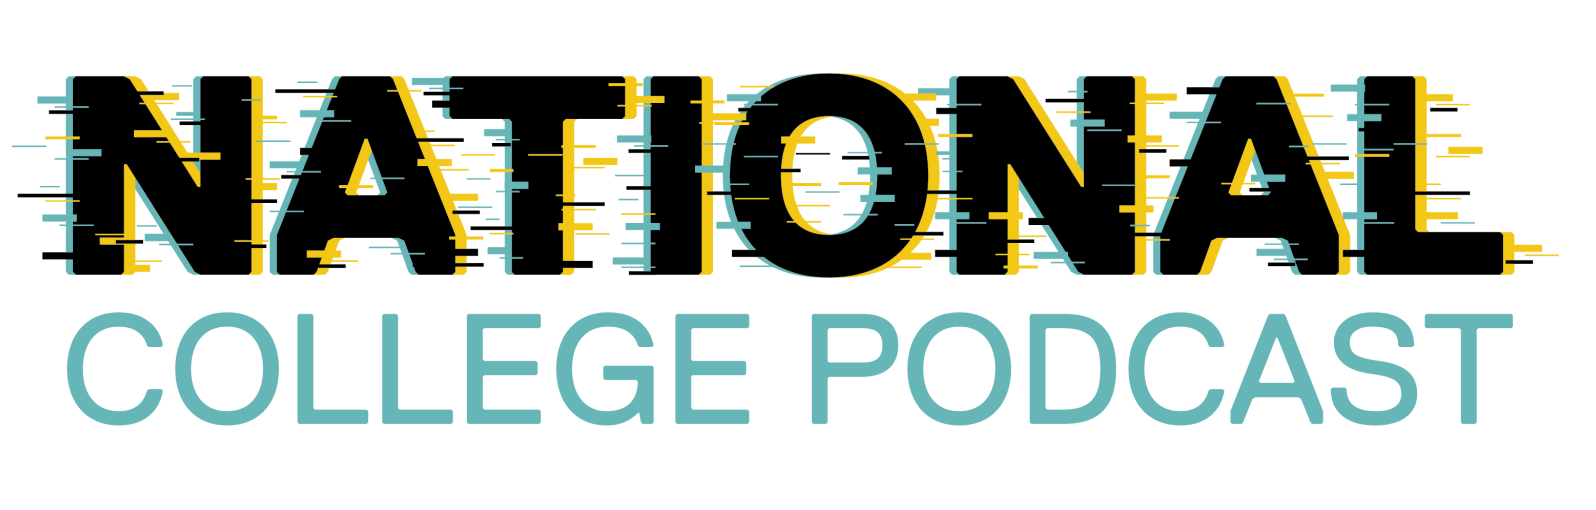 University of Salford National College Podcast logo 